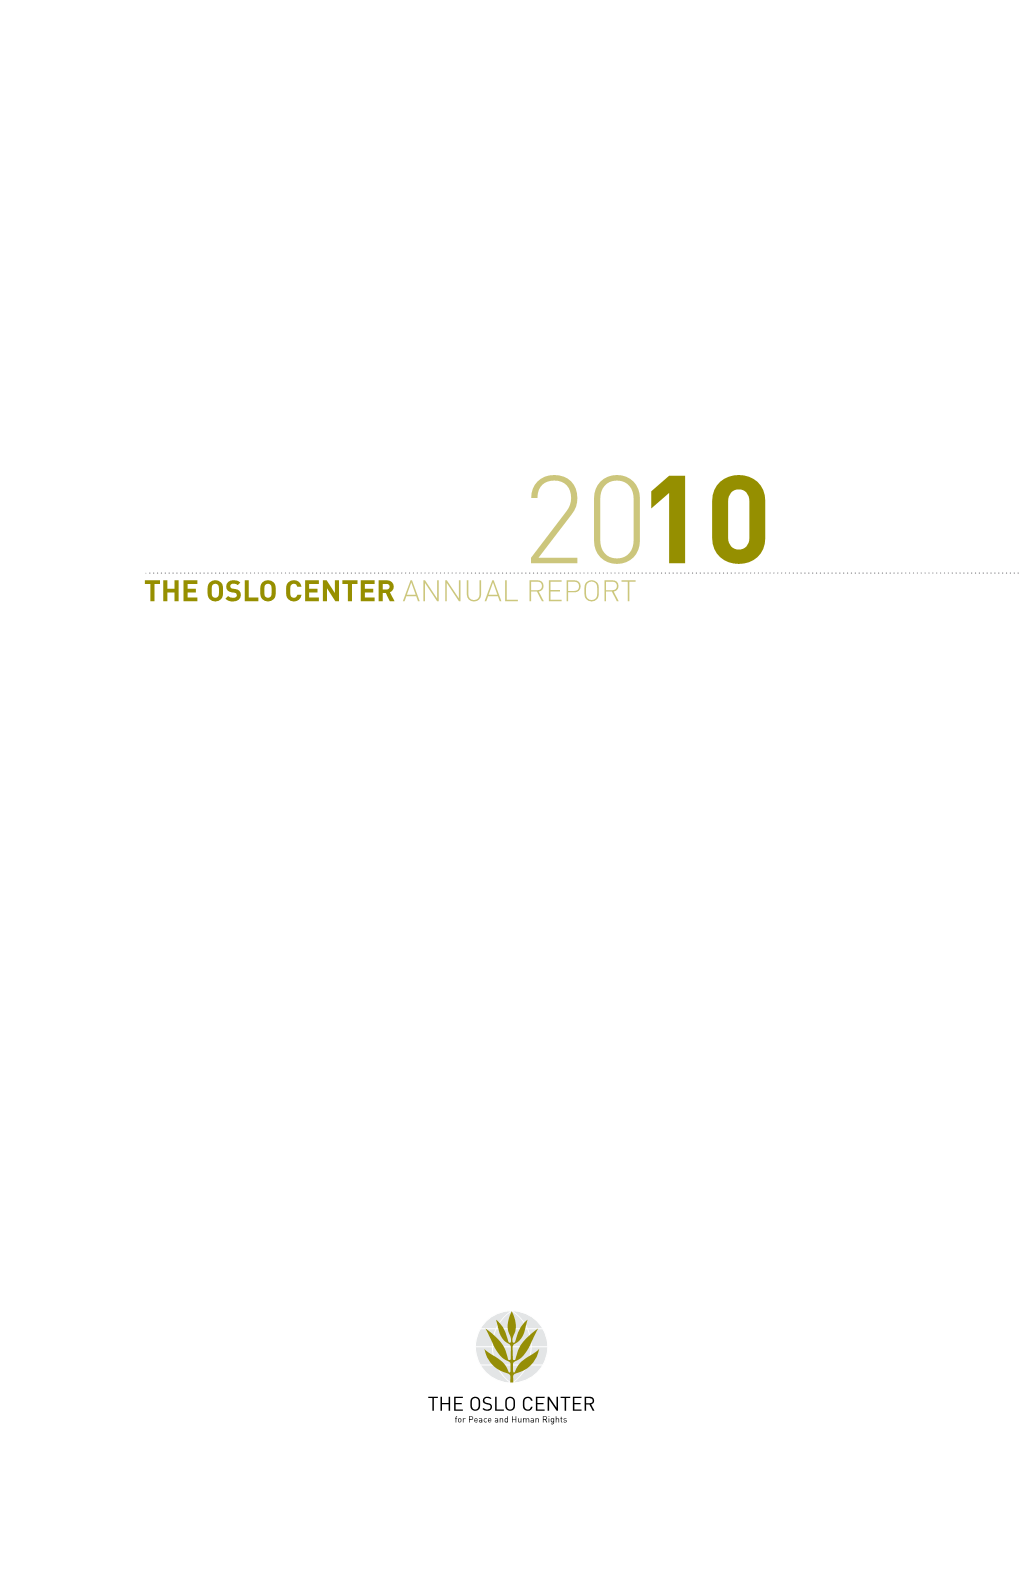 The Oslo Center Annual Report 2 Contents the First Five Years Page 4 Operating in a Niche Page 5 the Oslo Center’S Main Objectives Page 6